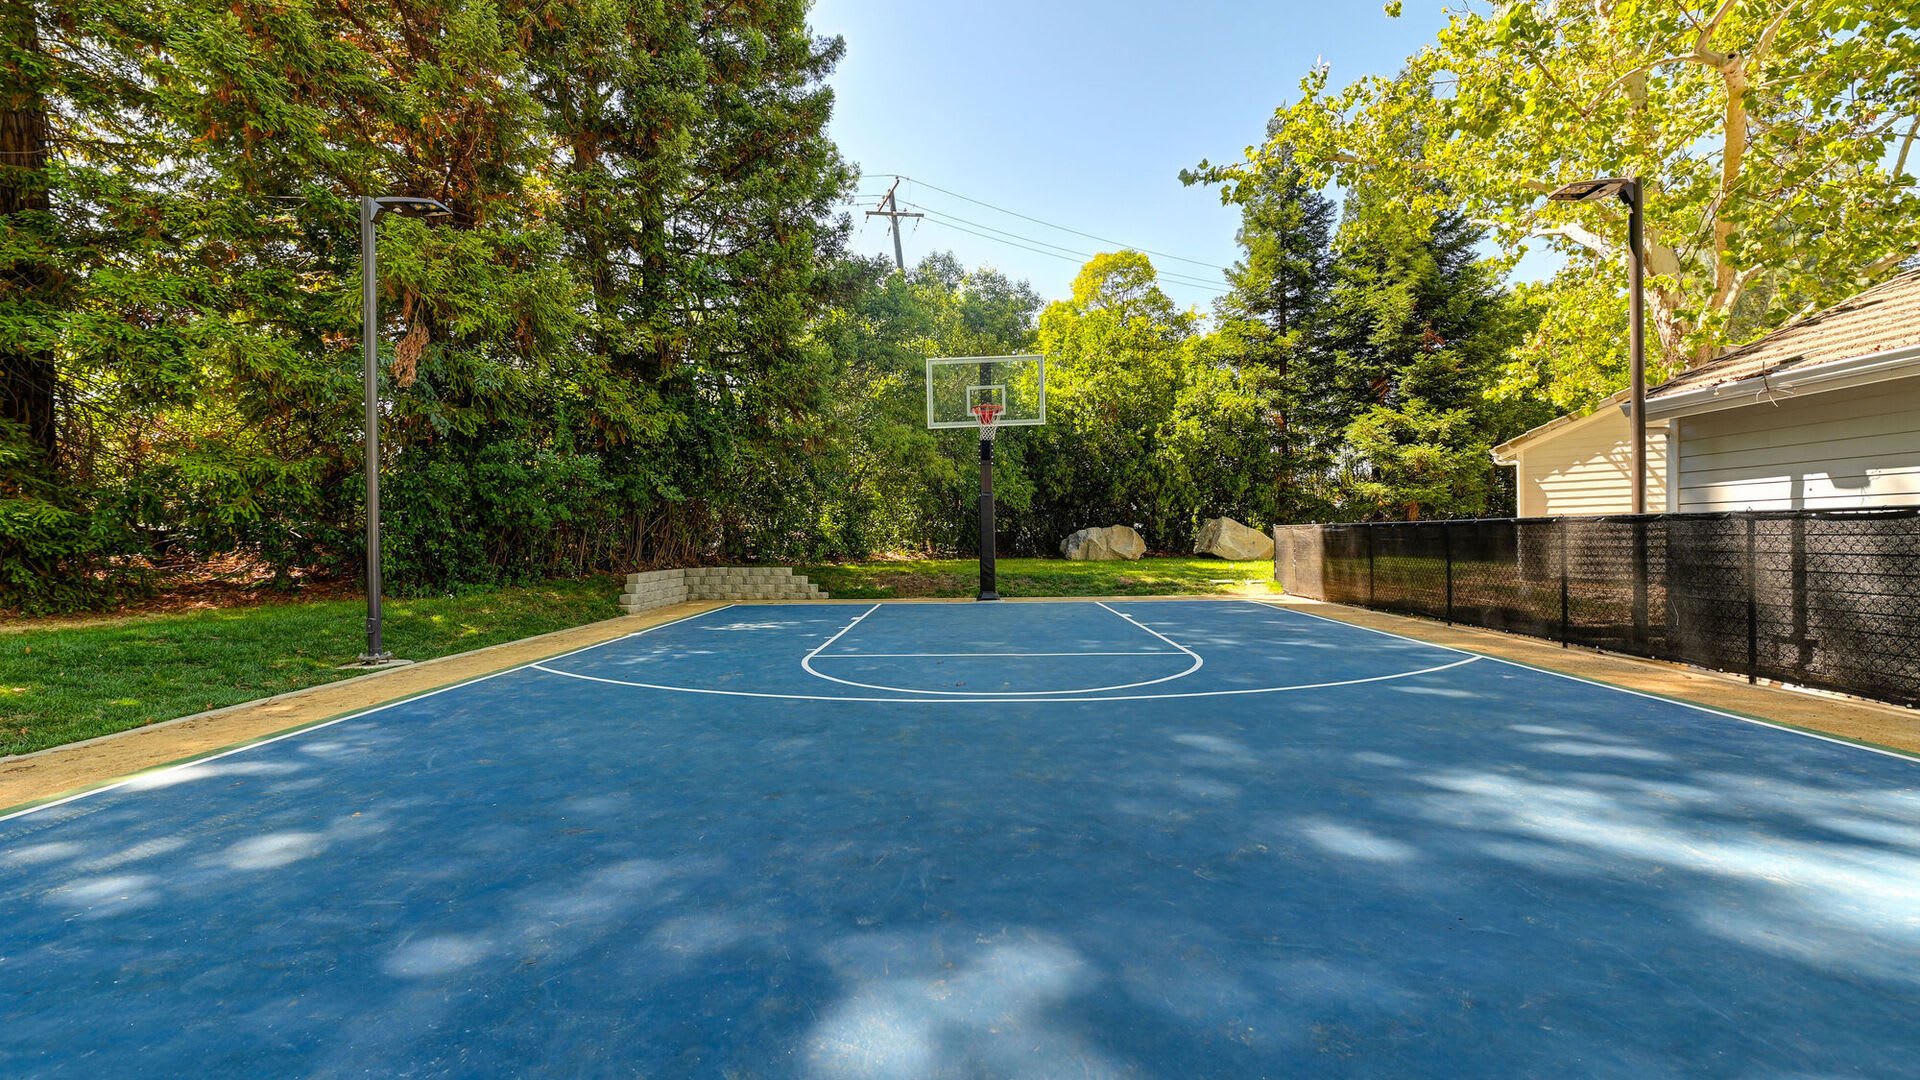 Basketball court at Lake Pointe Apartments in Folsom, California